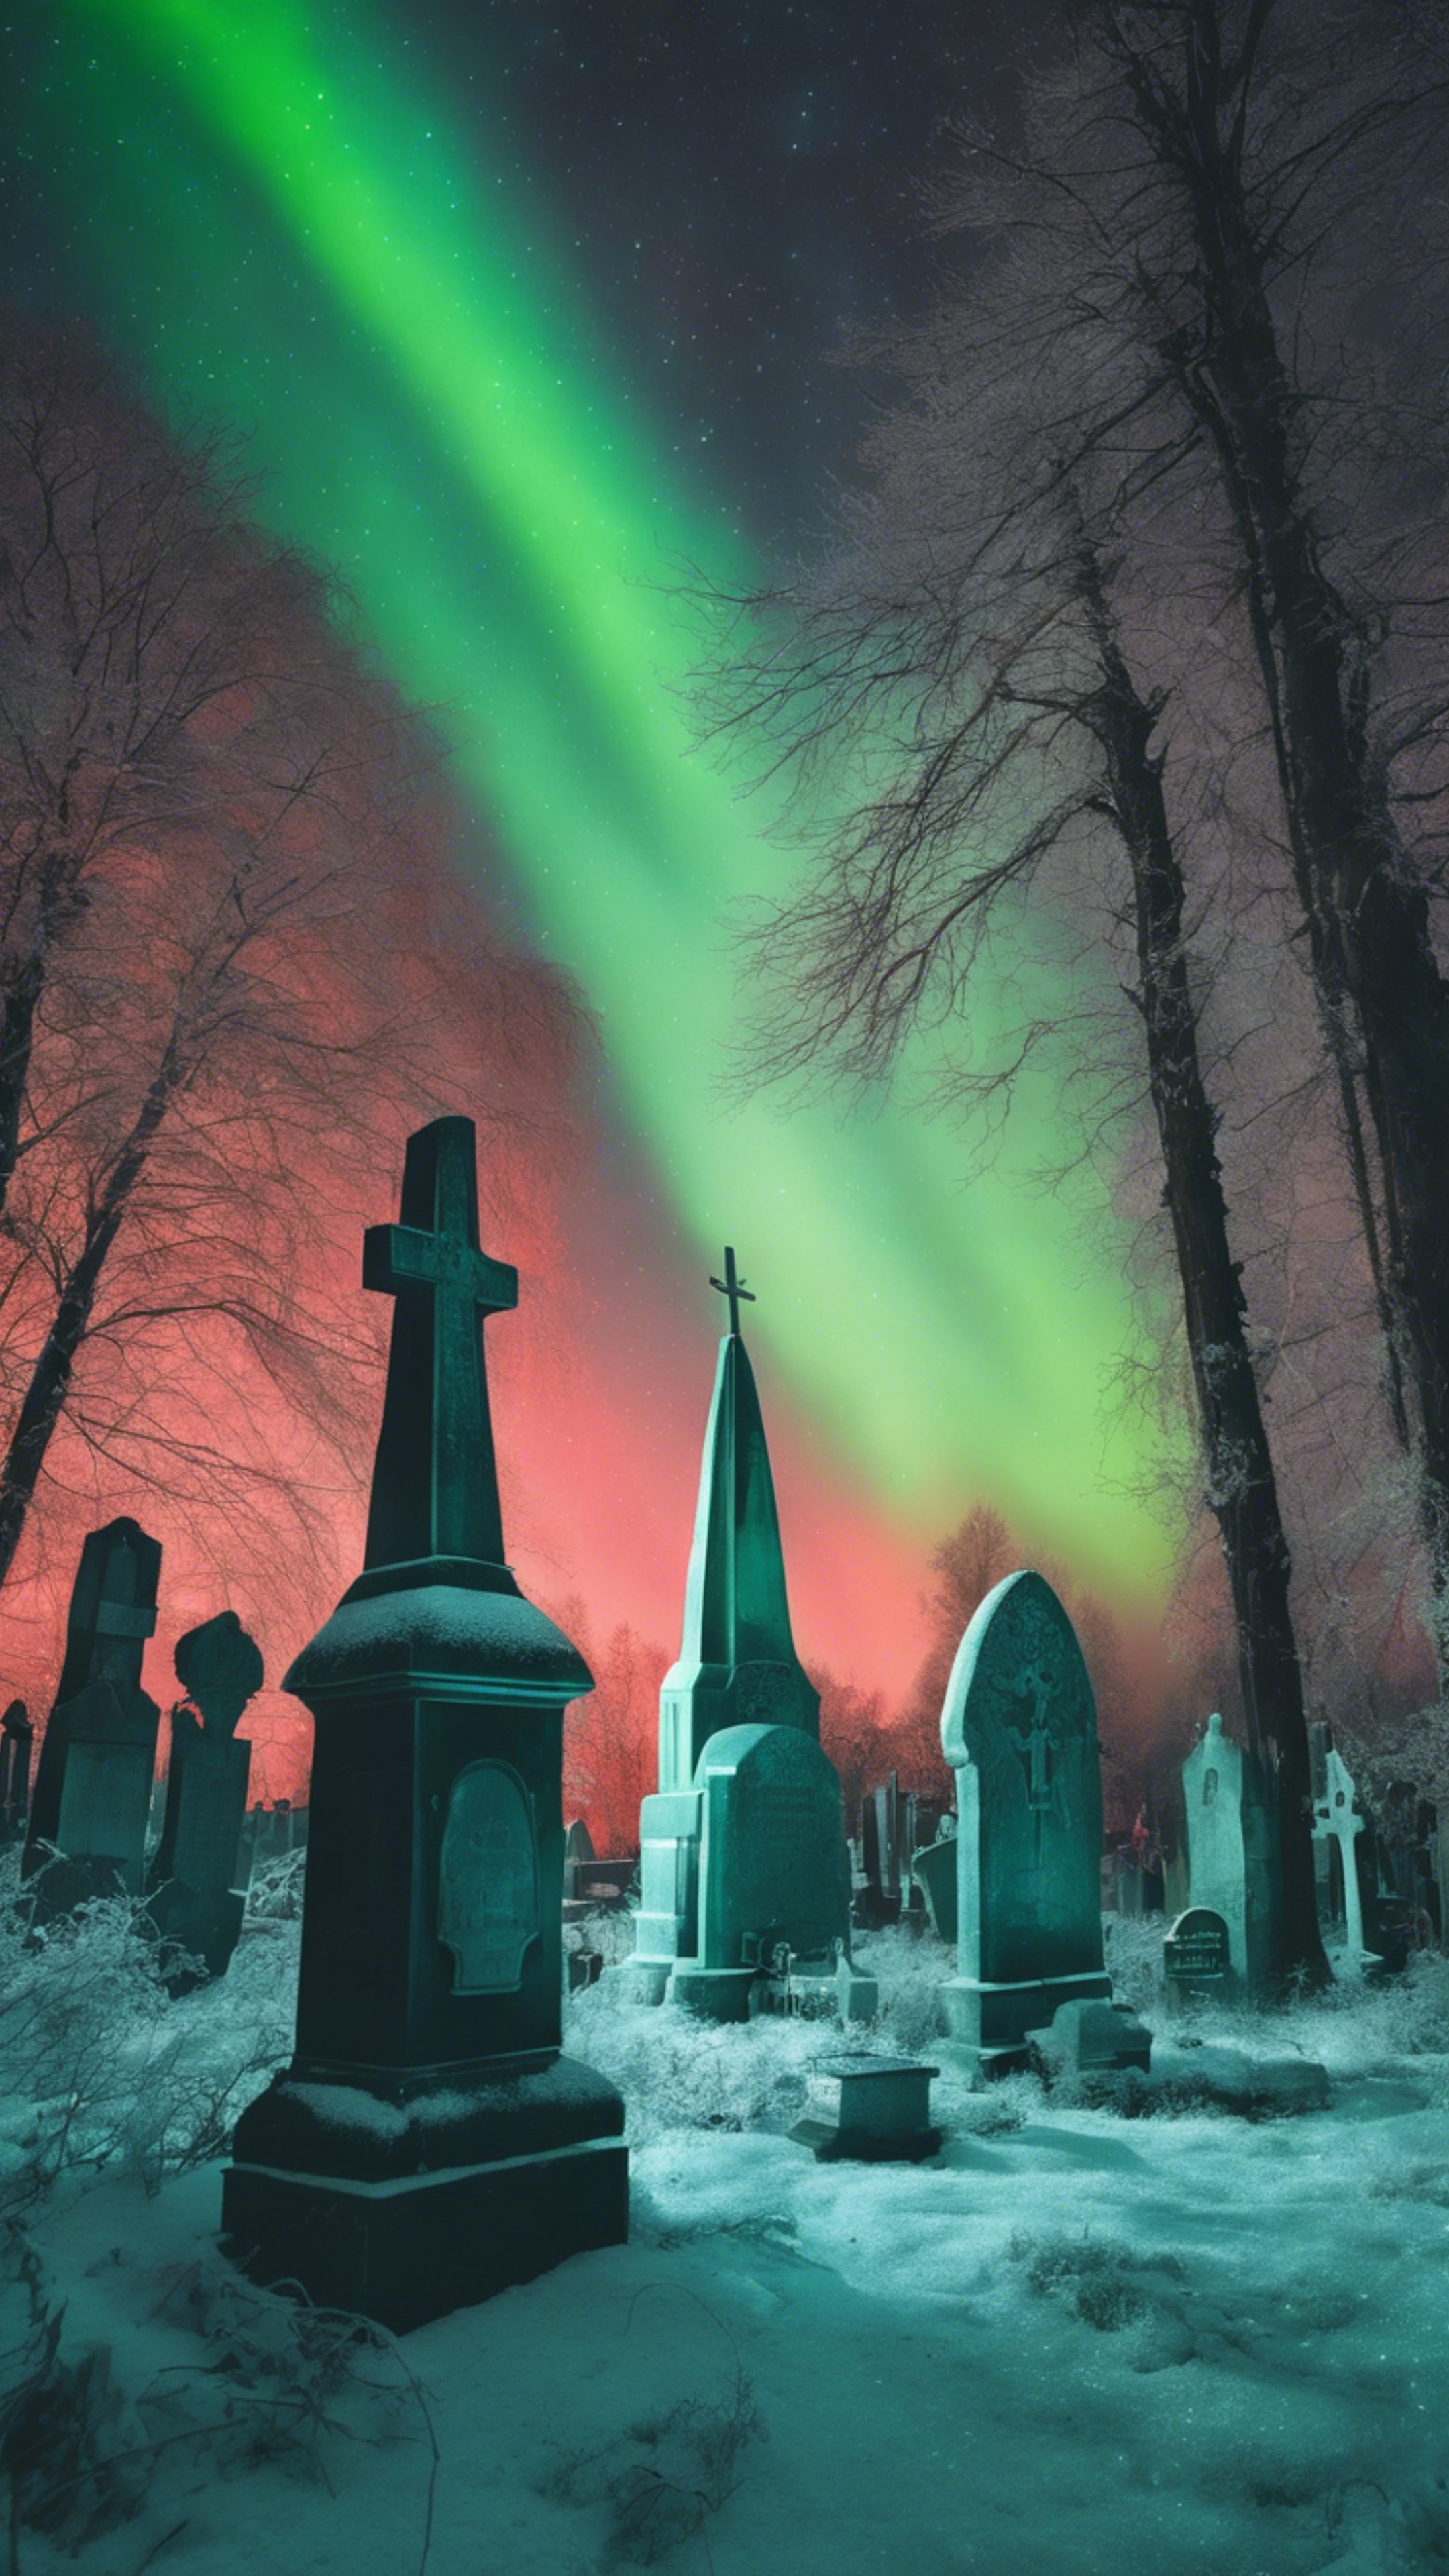 A frost-covered gothic cemetery under a green aurora borealis, with lingering red glowing specters. Wallpaper[65946d020479401482be]